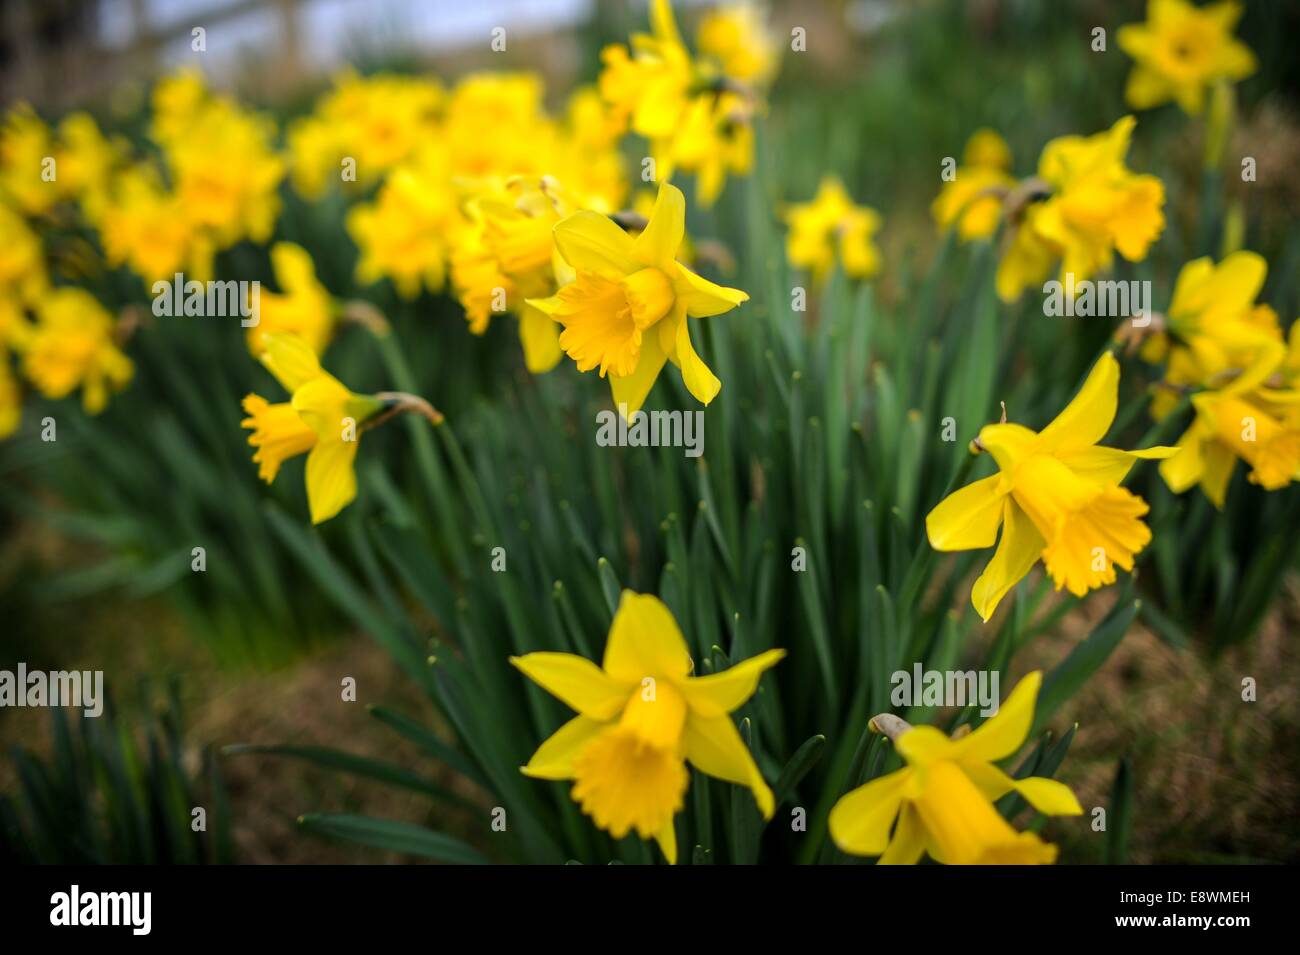 Daffodils are seen in bloom in a field near Ashby, England Stock Photo